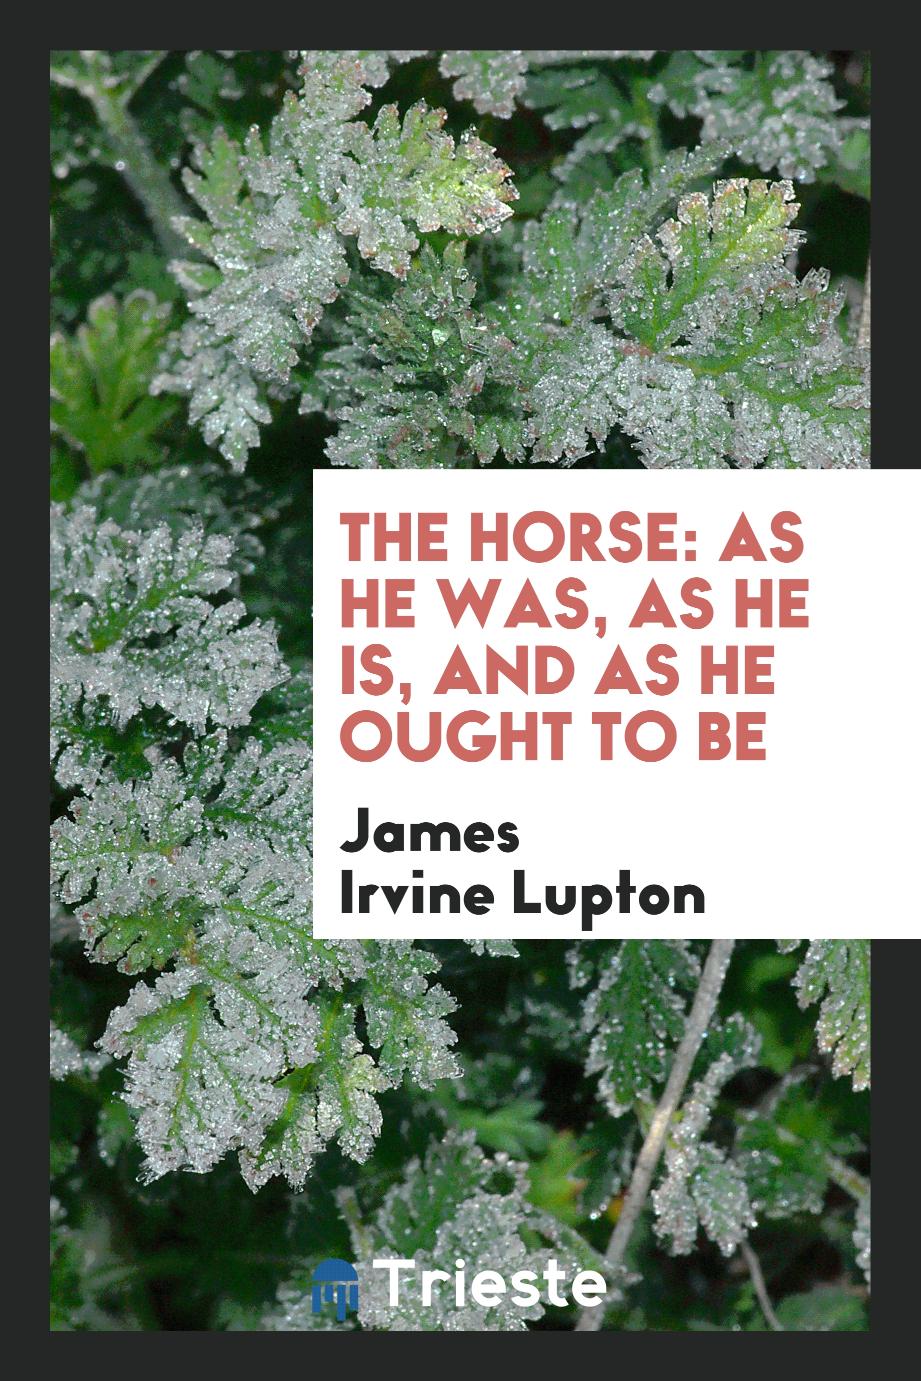 The Horse: As He Was, as He Is, and as He Ought to Be